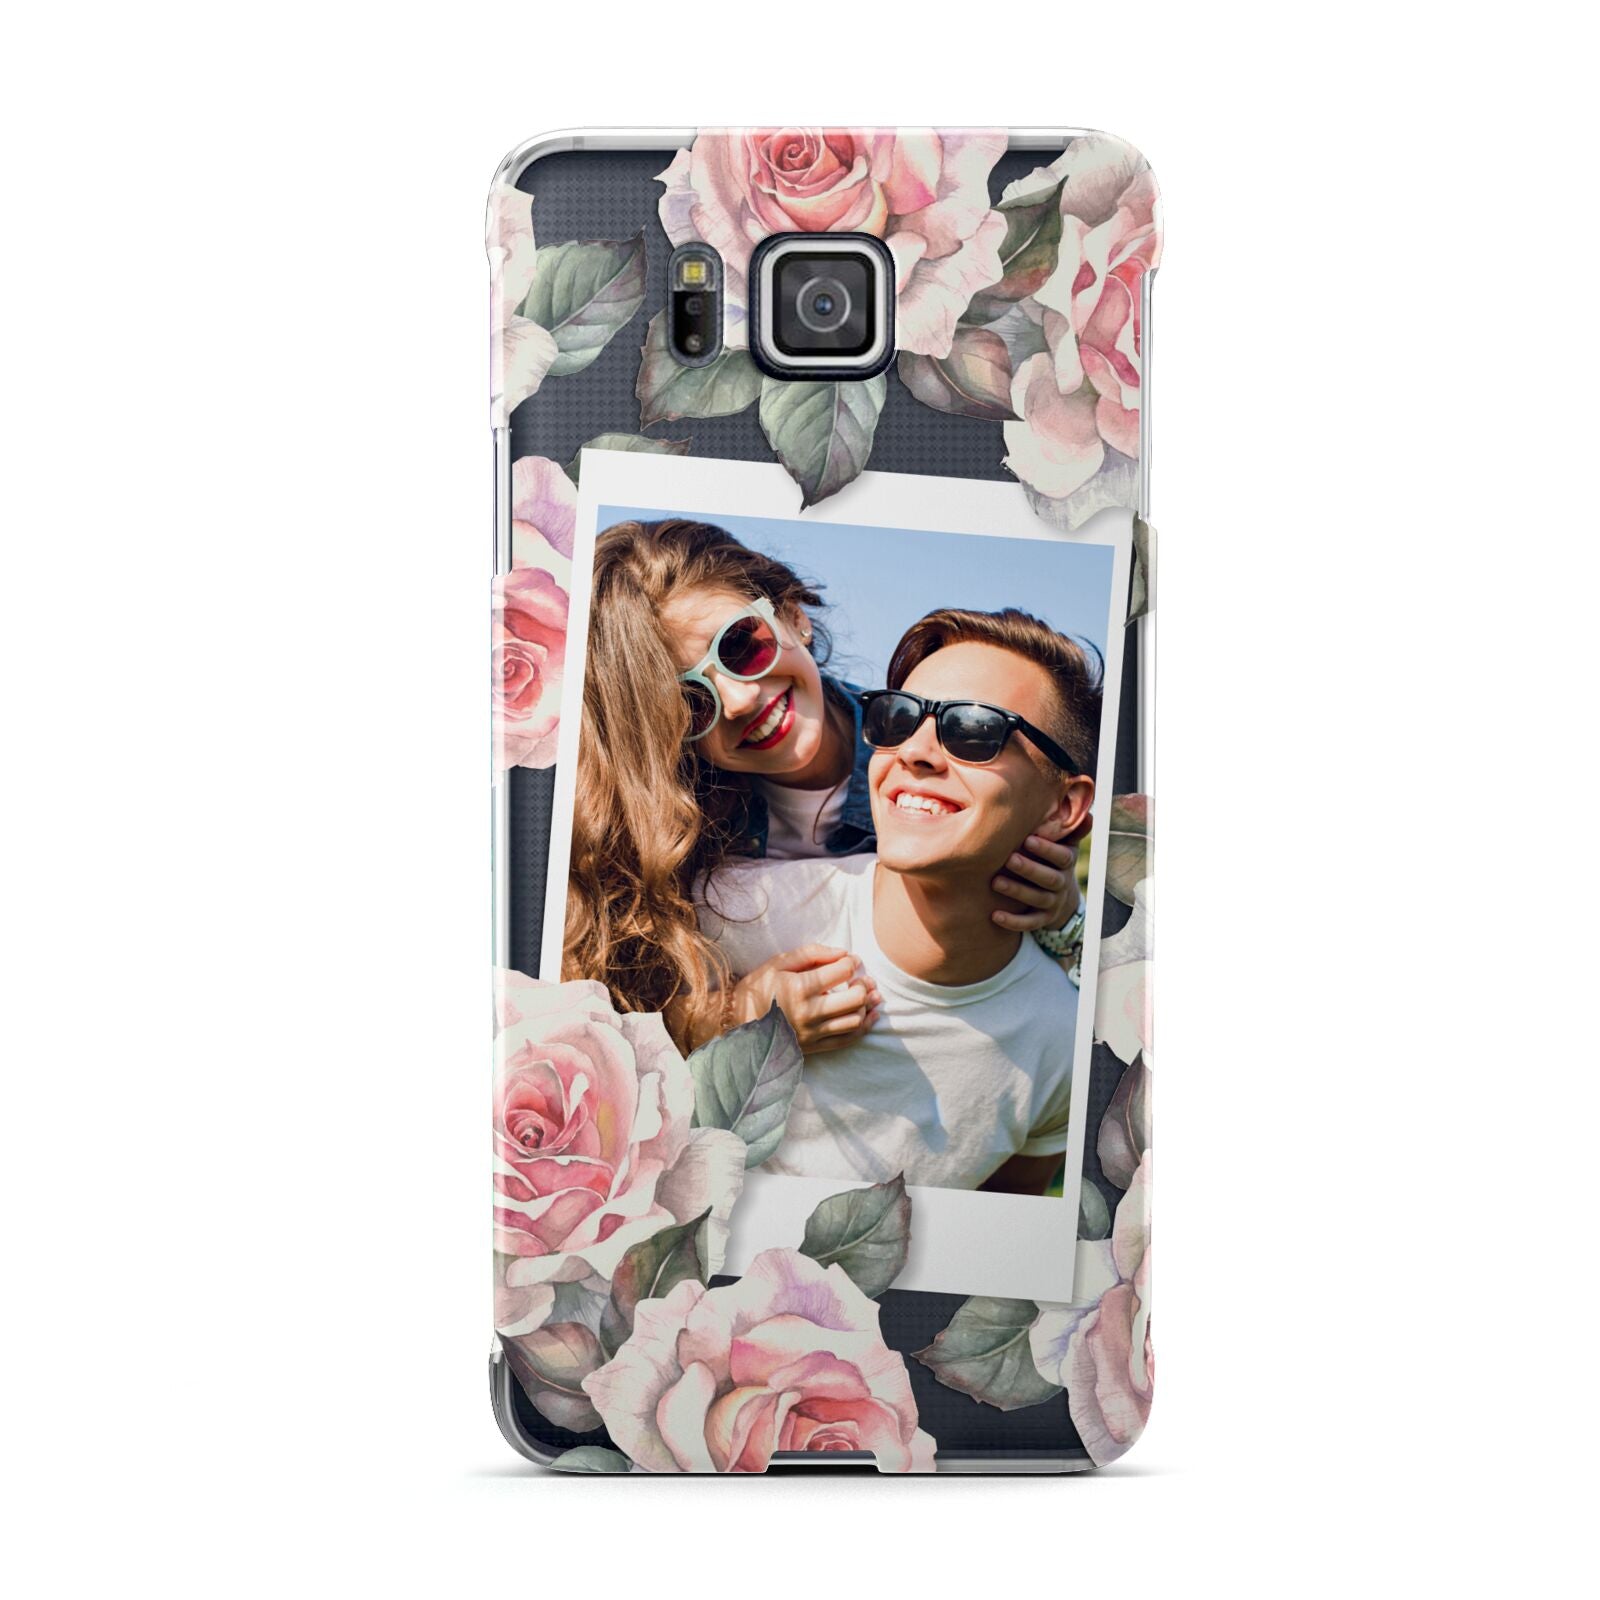 Personalised Photo Floral Samsung Galaxy Alpha Case